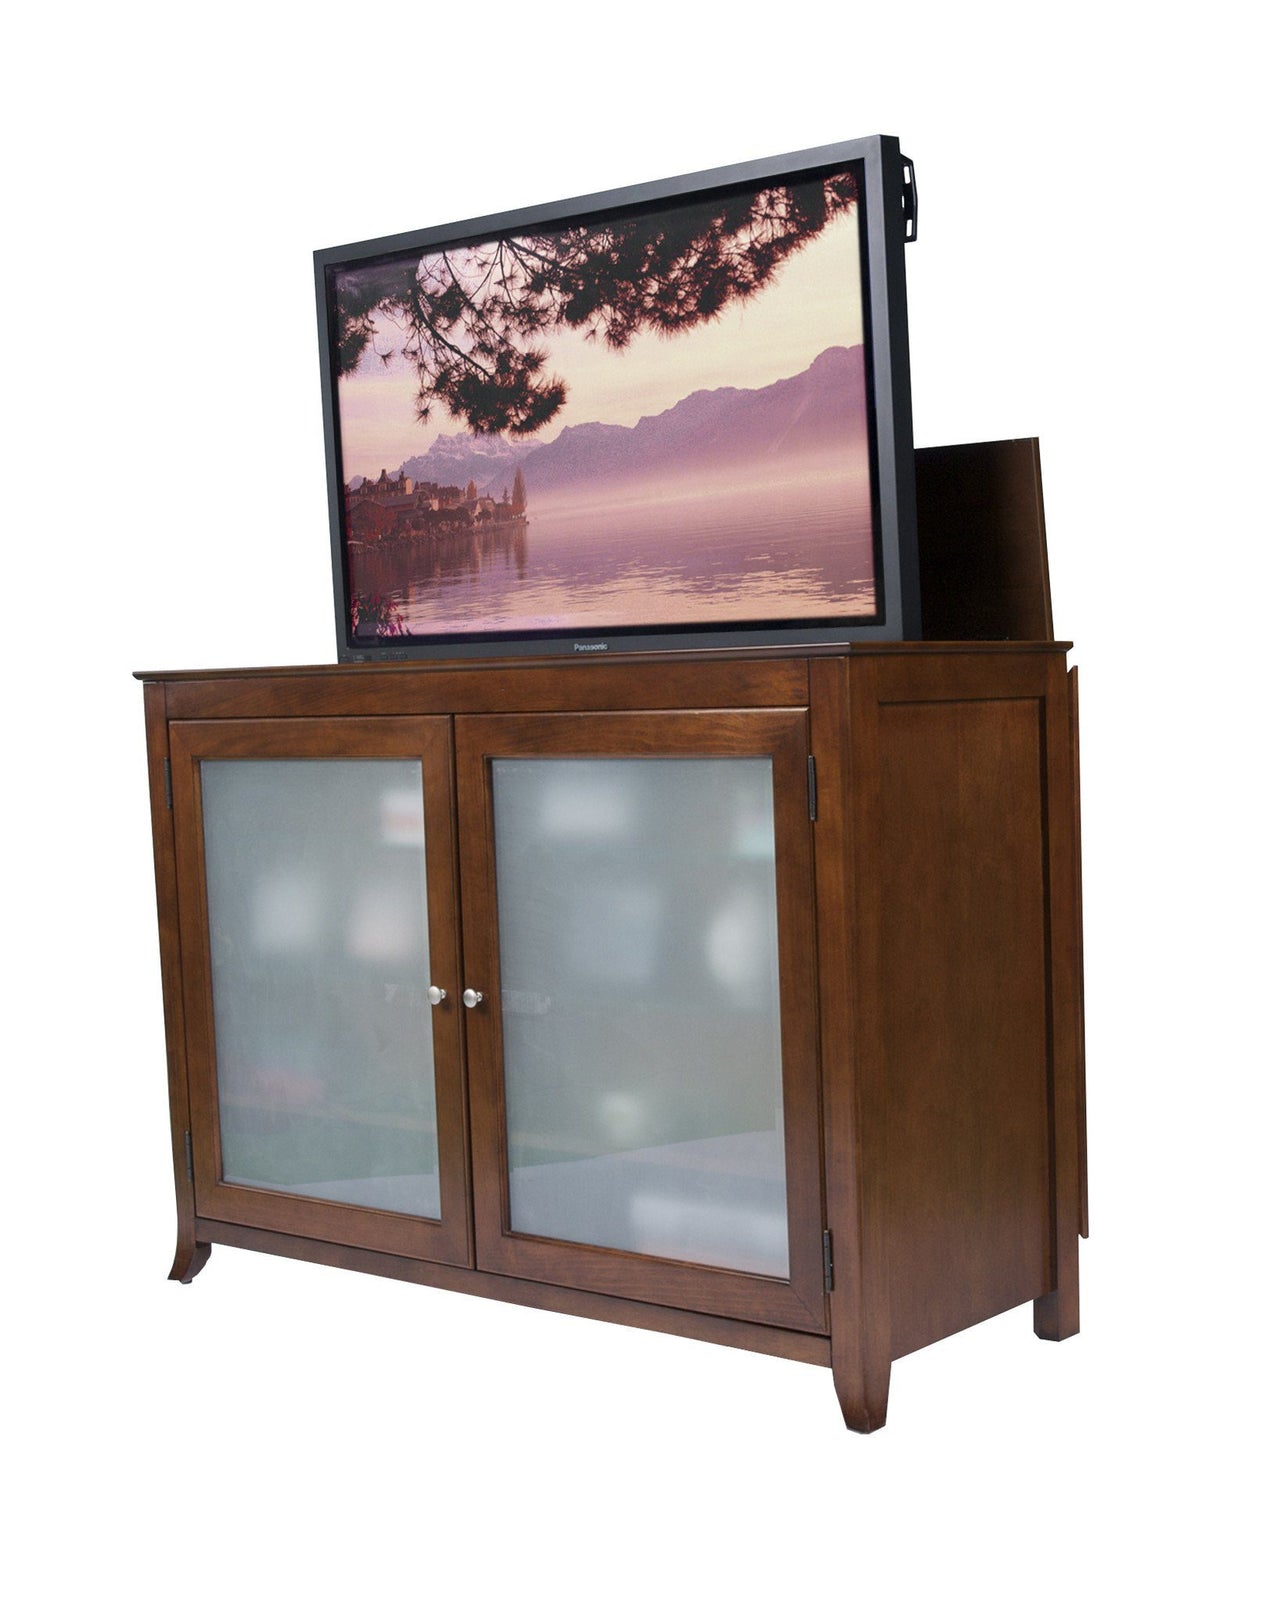 Touchstone Brookside Full Size Lift Cabinets For Up To 60” Flat Screen Tv’S Tv Lift Cabinets Touchstone 